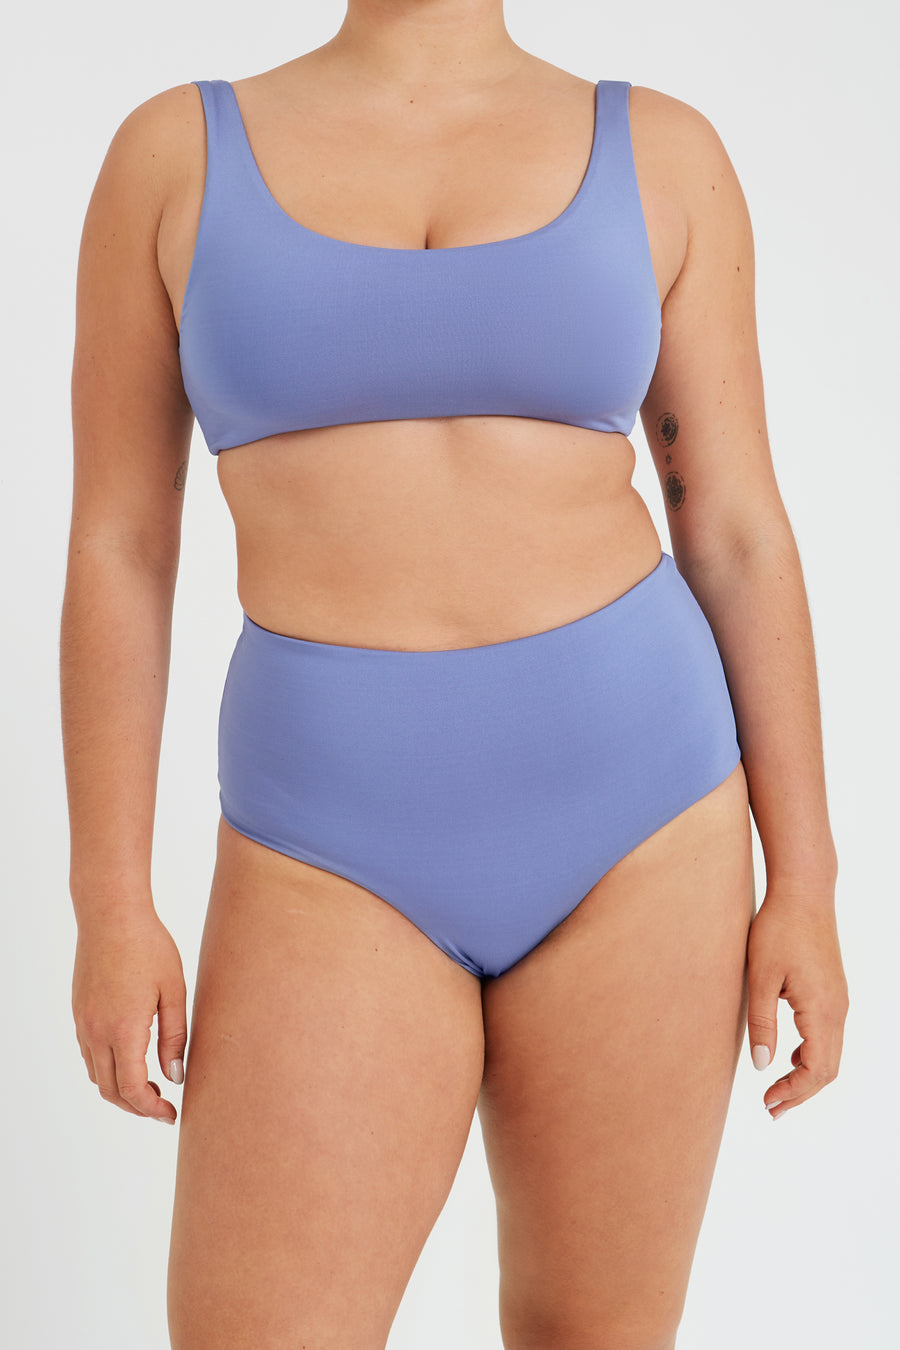 TOP – sporty, blue